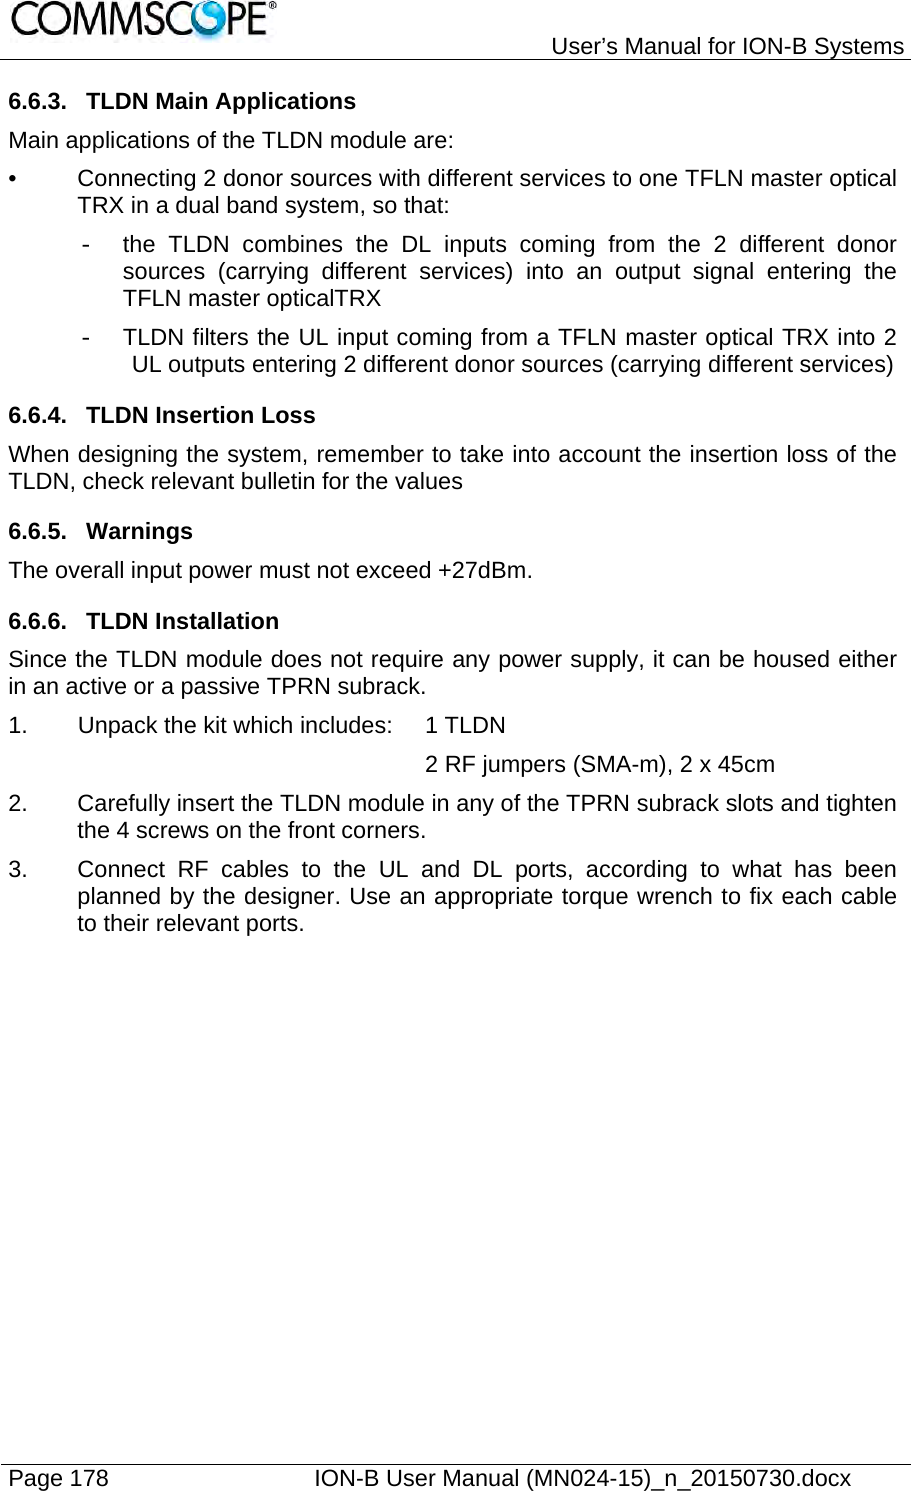   User’s Manual for ION-B Systems Page 178    ION-B User Manual (MN024-15)_n_20150730.docx  6.6.3.  TLDN Main Applications Main applications of the TLDN module are: •  Connecting 2 donor sources with different services to one TFLN master optical TRX in a dual band system, so that: -  the TLDN combines the DL inputs coming from the 2 different donor sources (carrying different services) into an output signal entering the TFLN master opticalTRX -  TLDN filters the UL input coming from a TFLN master optical TRX into 2 UL outputs entering 2 different donor sources (carrying different services) 6.6.4.  TLDN Insertion Loss When designing the system, remember to take into account the insertion loss of the TLDN, check relevant bulletin for the values 6.6.5. Warnings The overall input power must not exceed +27dBm. 6.6.6. TLDN Installation Since the TLDN module does not require any power supply, it can be housed either in an active or a passive TPRN subrack. 1.  Unpack the kit which includes:  1 TLDN 2 RF jumpers (SMA-m), 2 x 45cm 2.  Carefully insert the TLDN module in any of the TPRN subrack slots and tighten the 4 screws on the front corners. 3.  Connect RF cables to the UL and DL ports, according to what has been planned by the designer. Use an appropriate torque wrench to fix each cable to their relevant ports.  